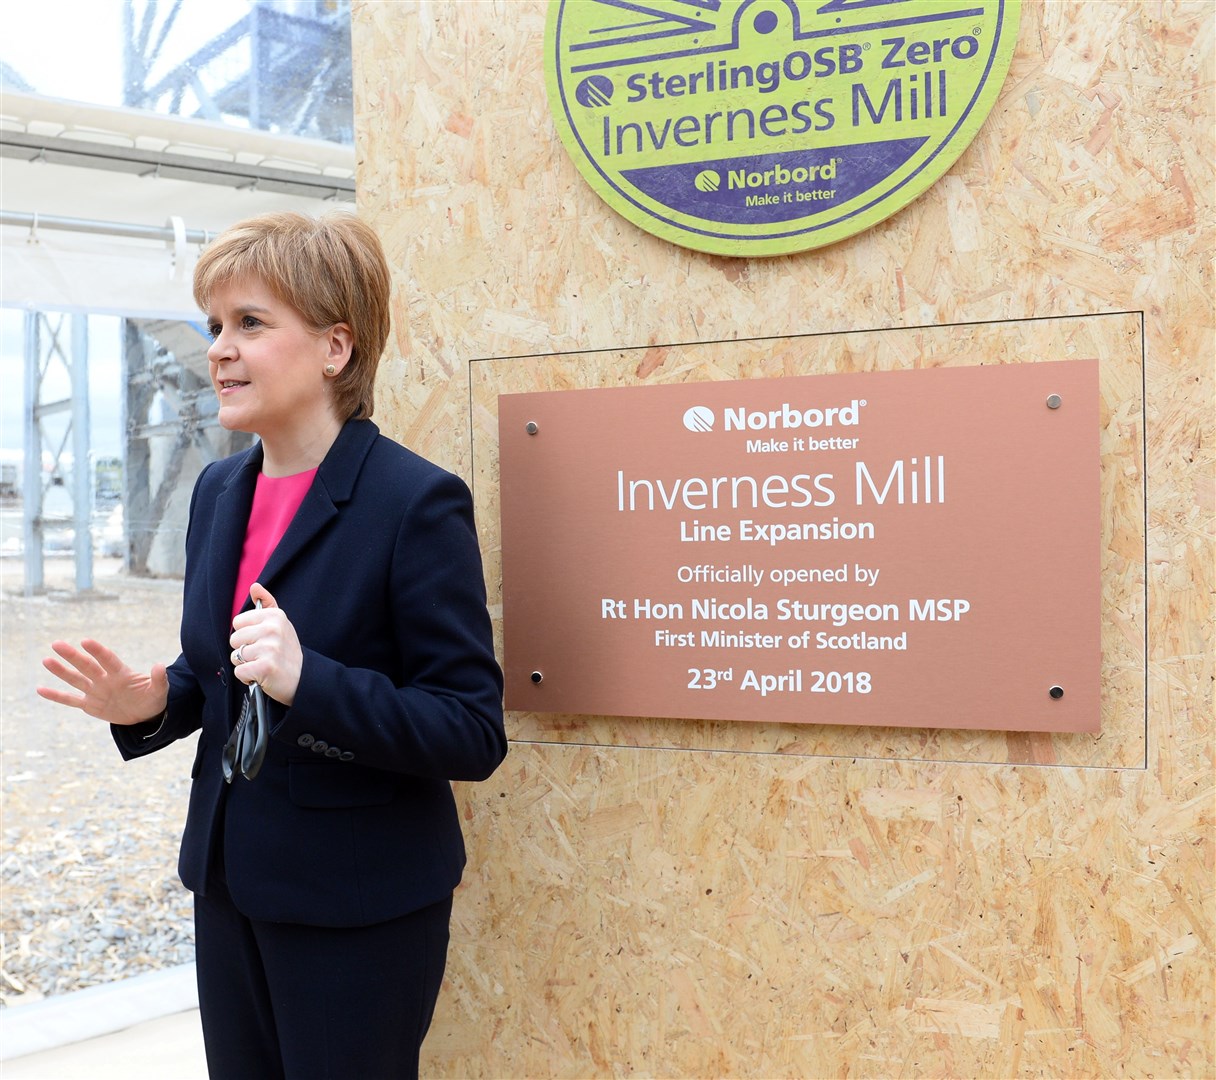 First Minister Nicola Sturgeon opens Expansion at Norbord...Picture: Gary Anthony. Image No.040882.